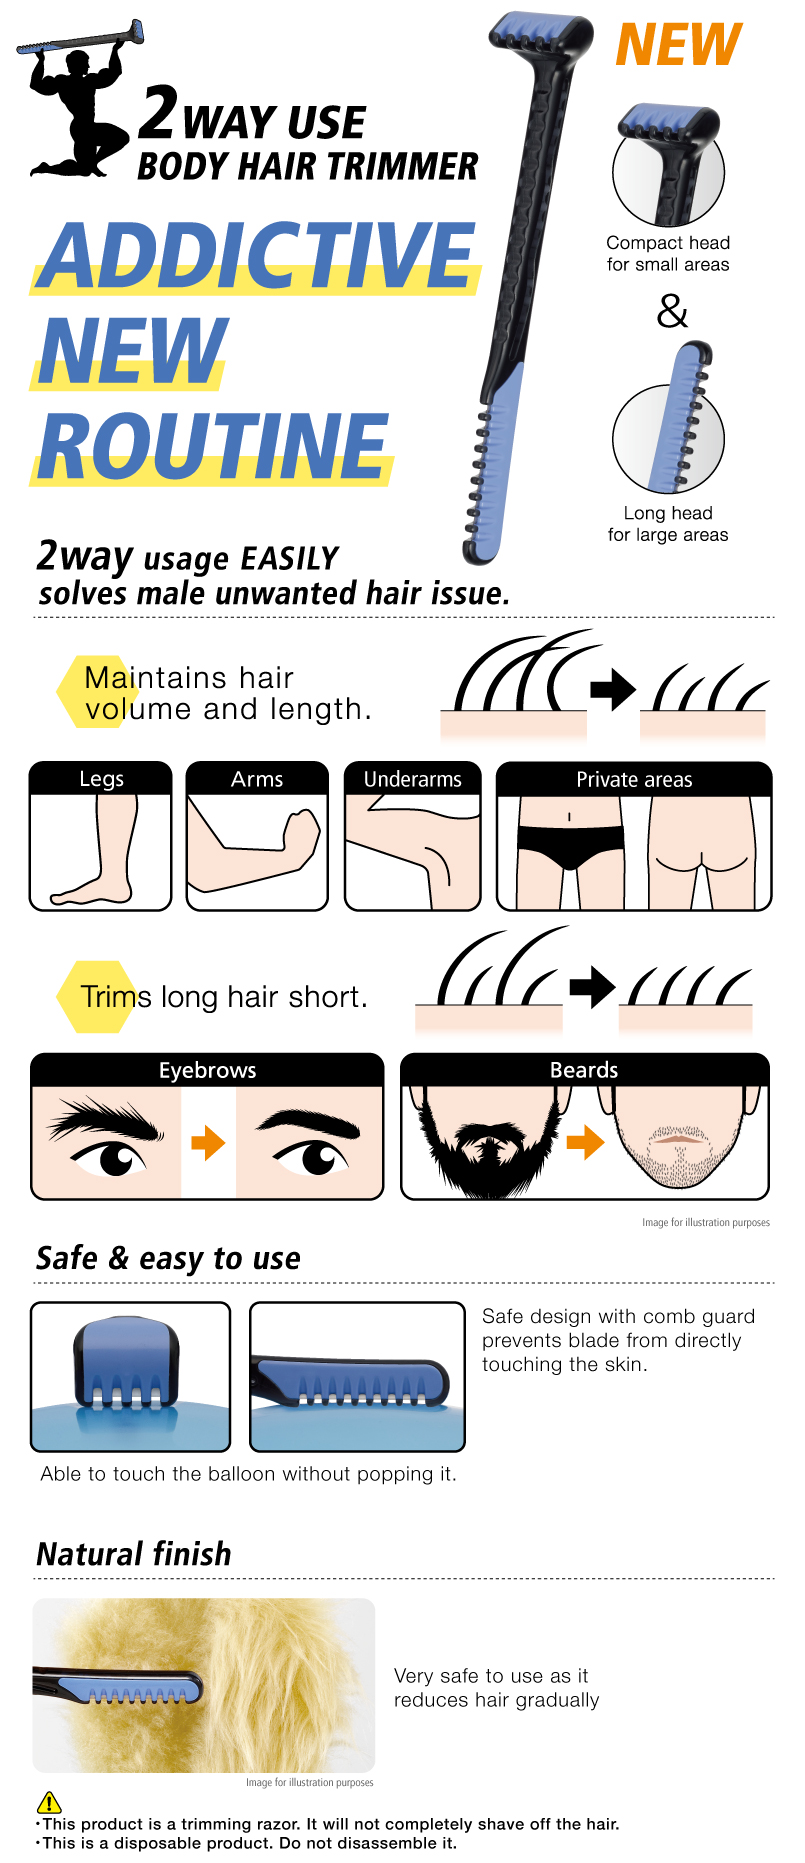 2WAY USE BODY HAIR TRIMMER